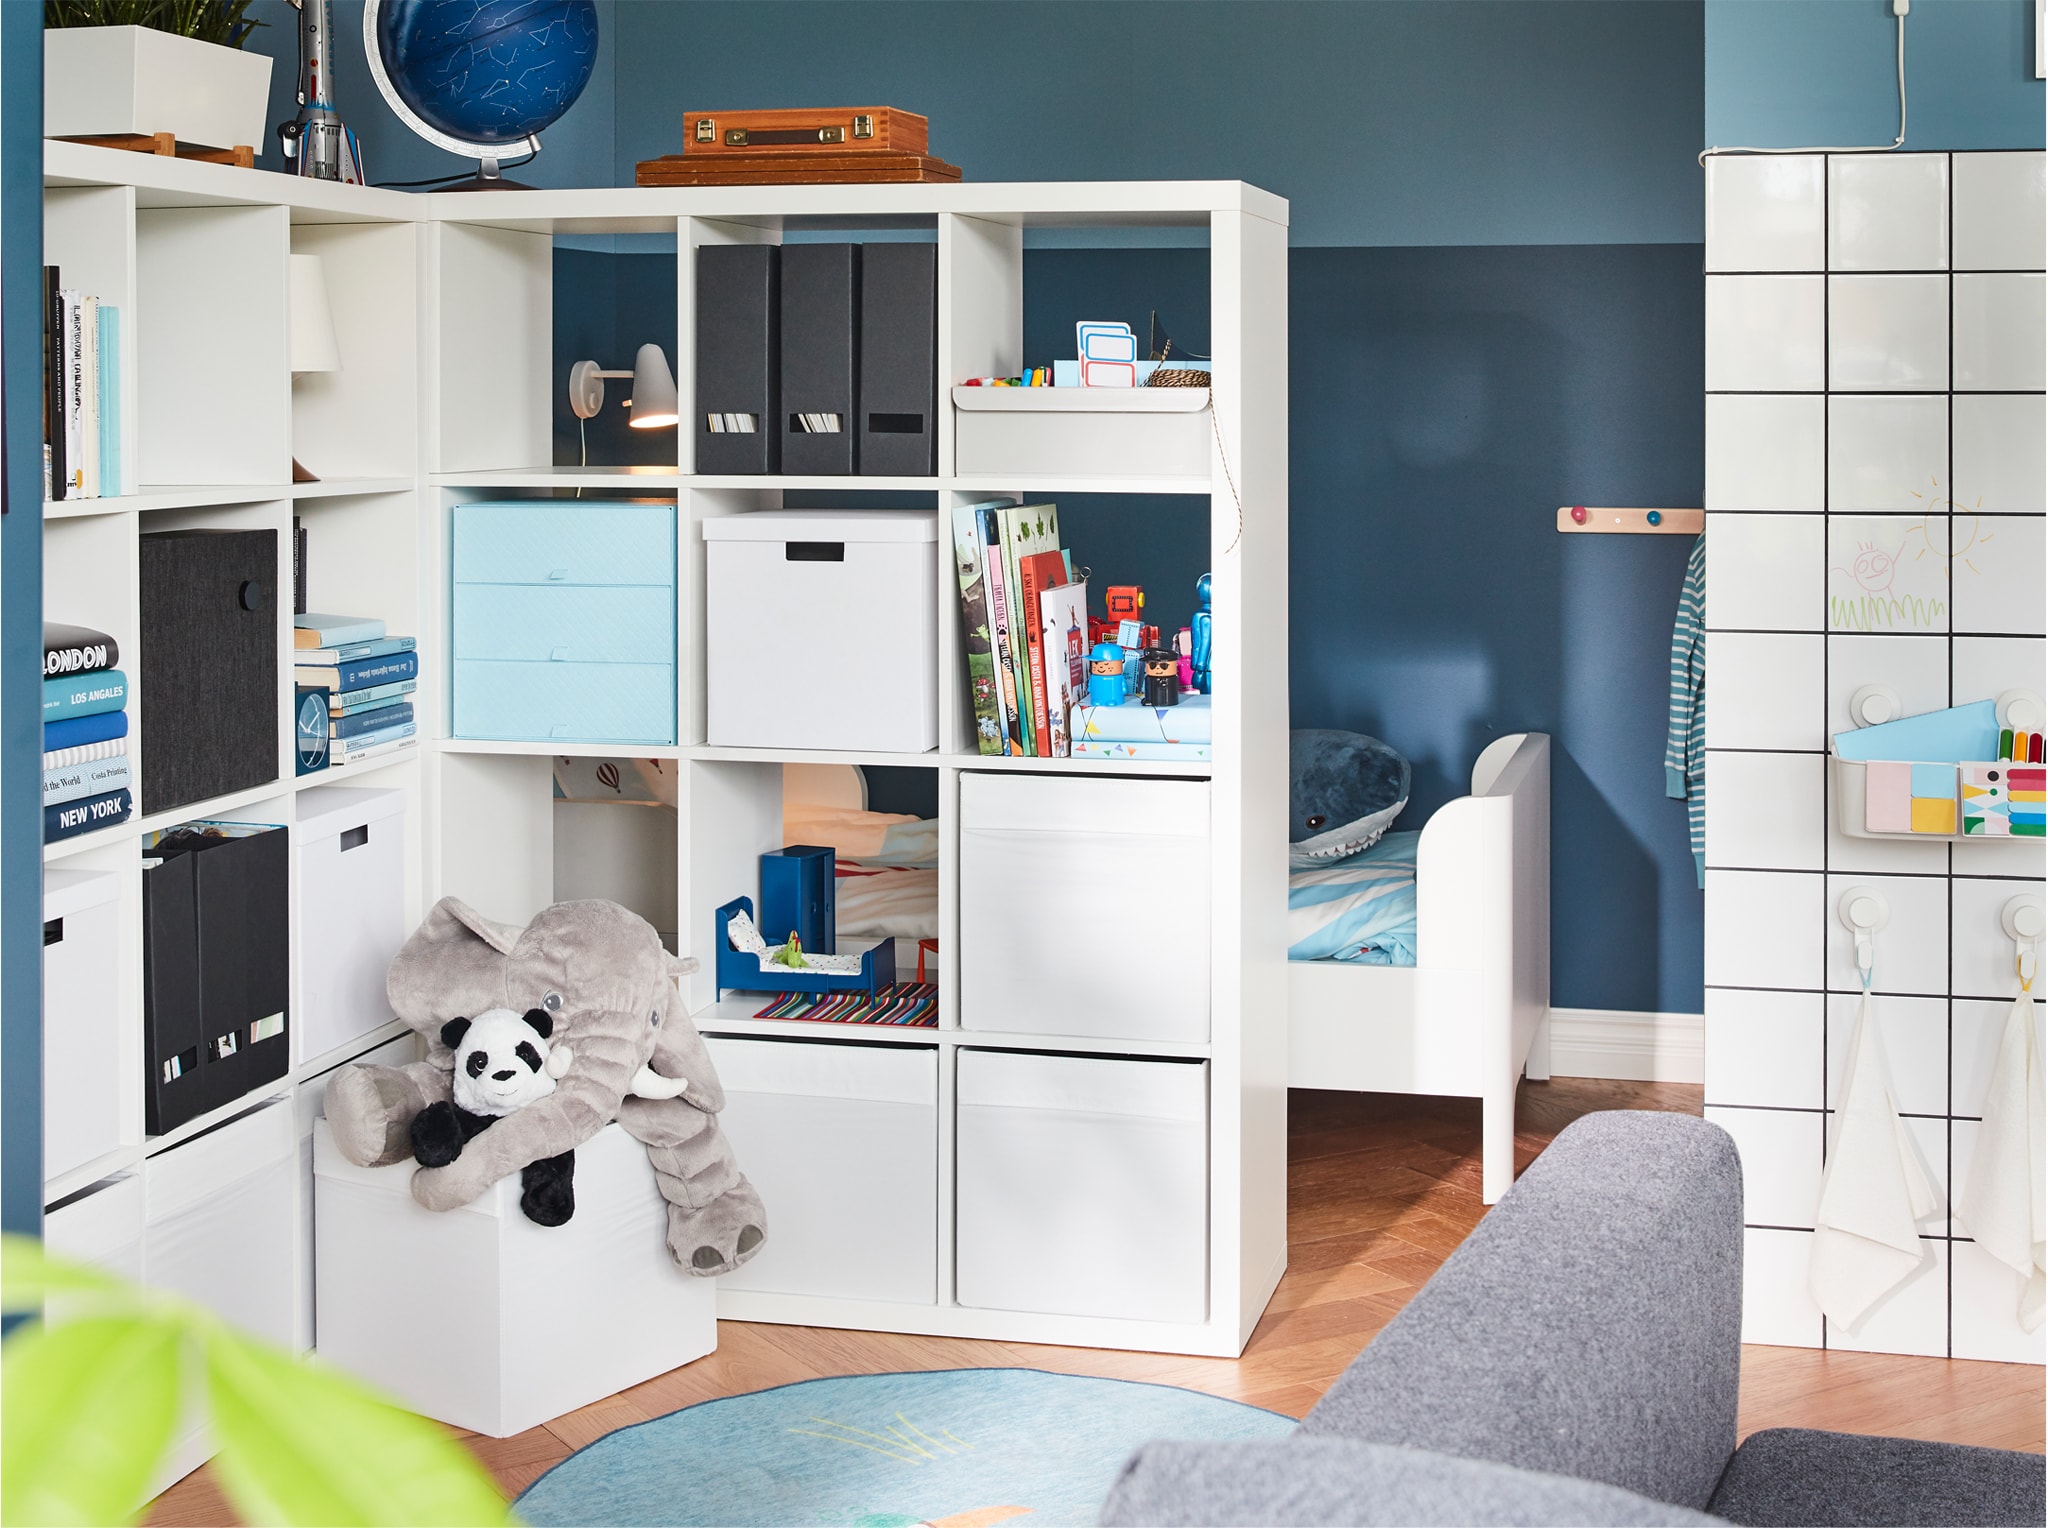  Two shelving units serve as a room divider while offering much storage space. Behind them, you can glimpse a children's bed.